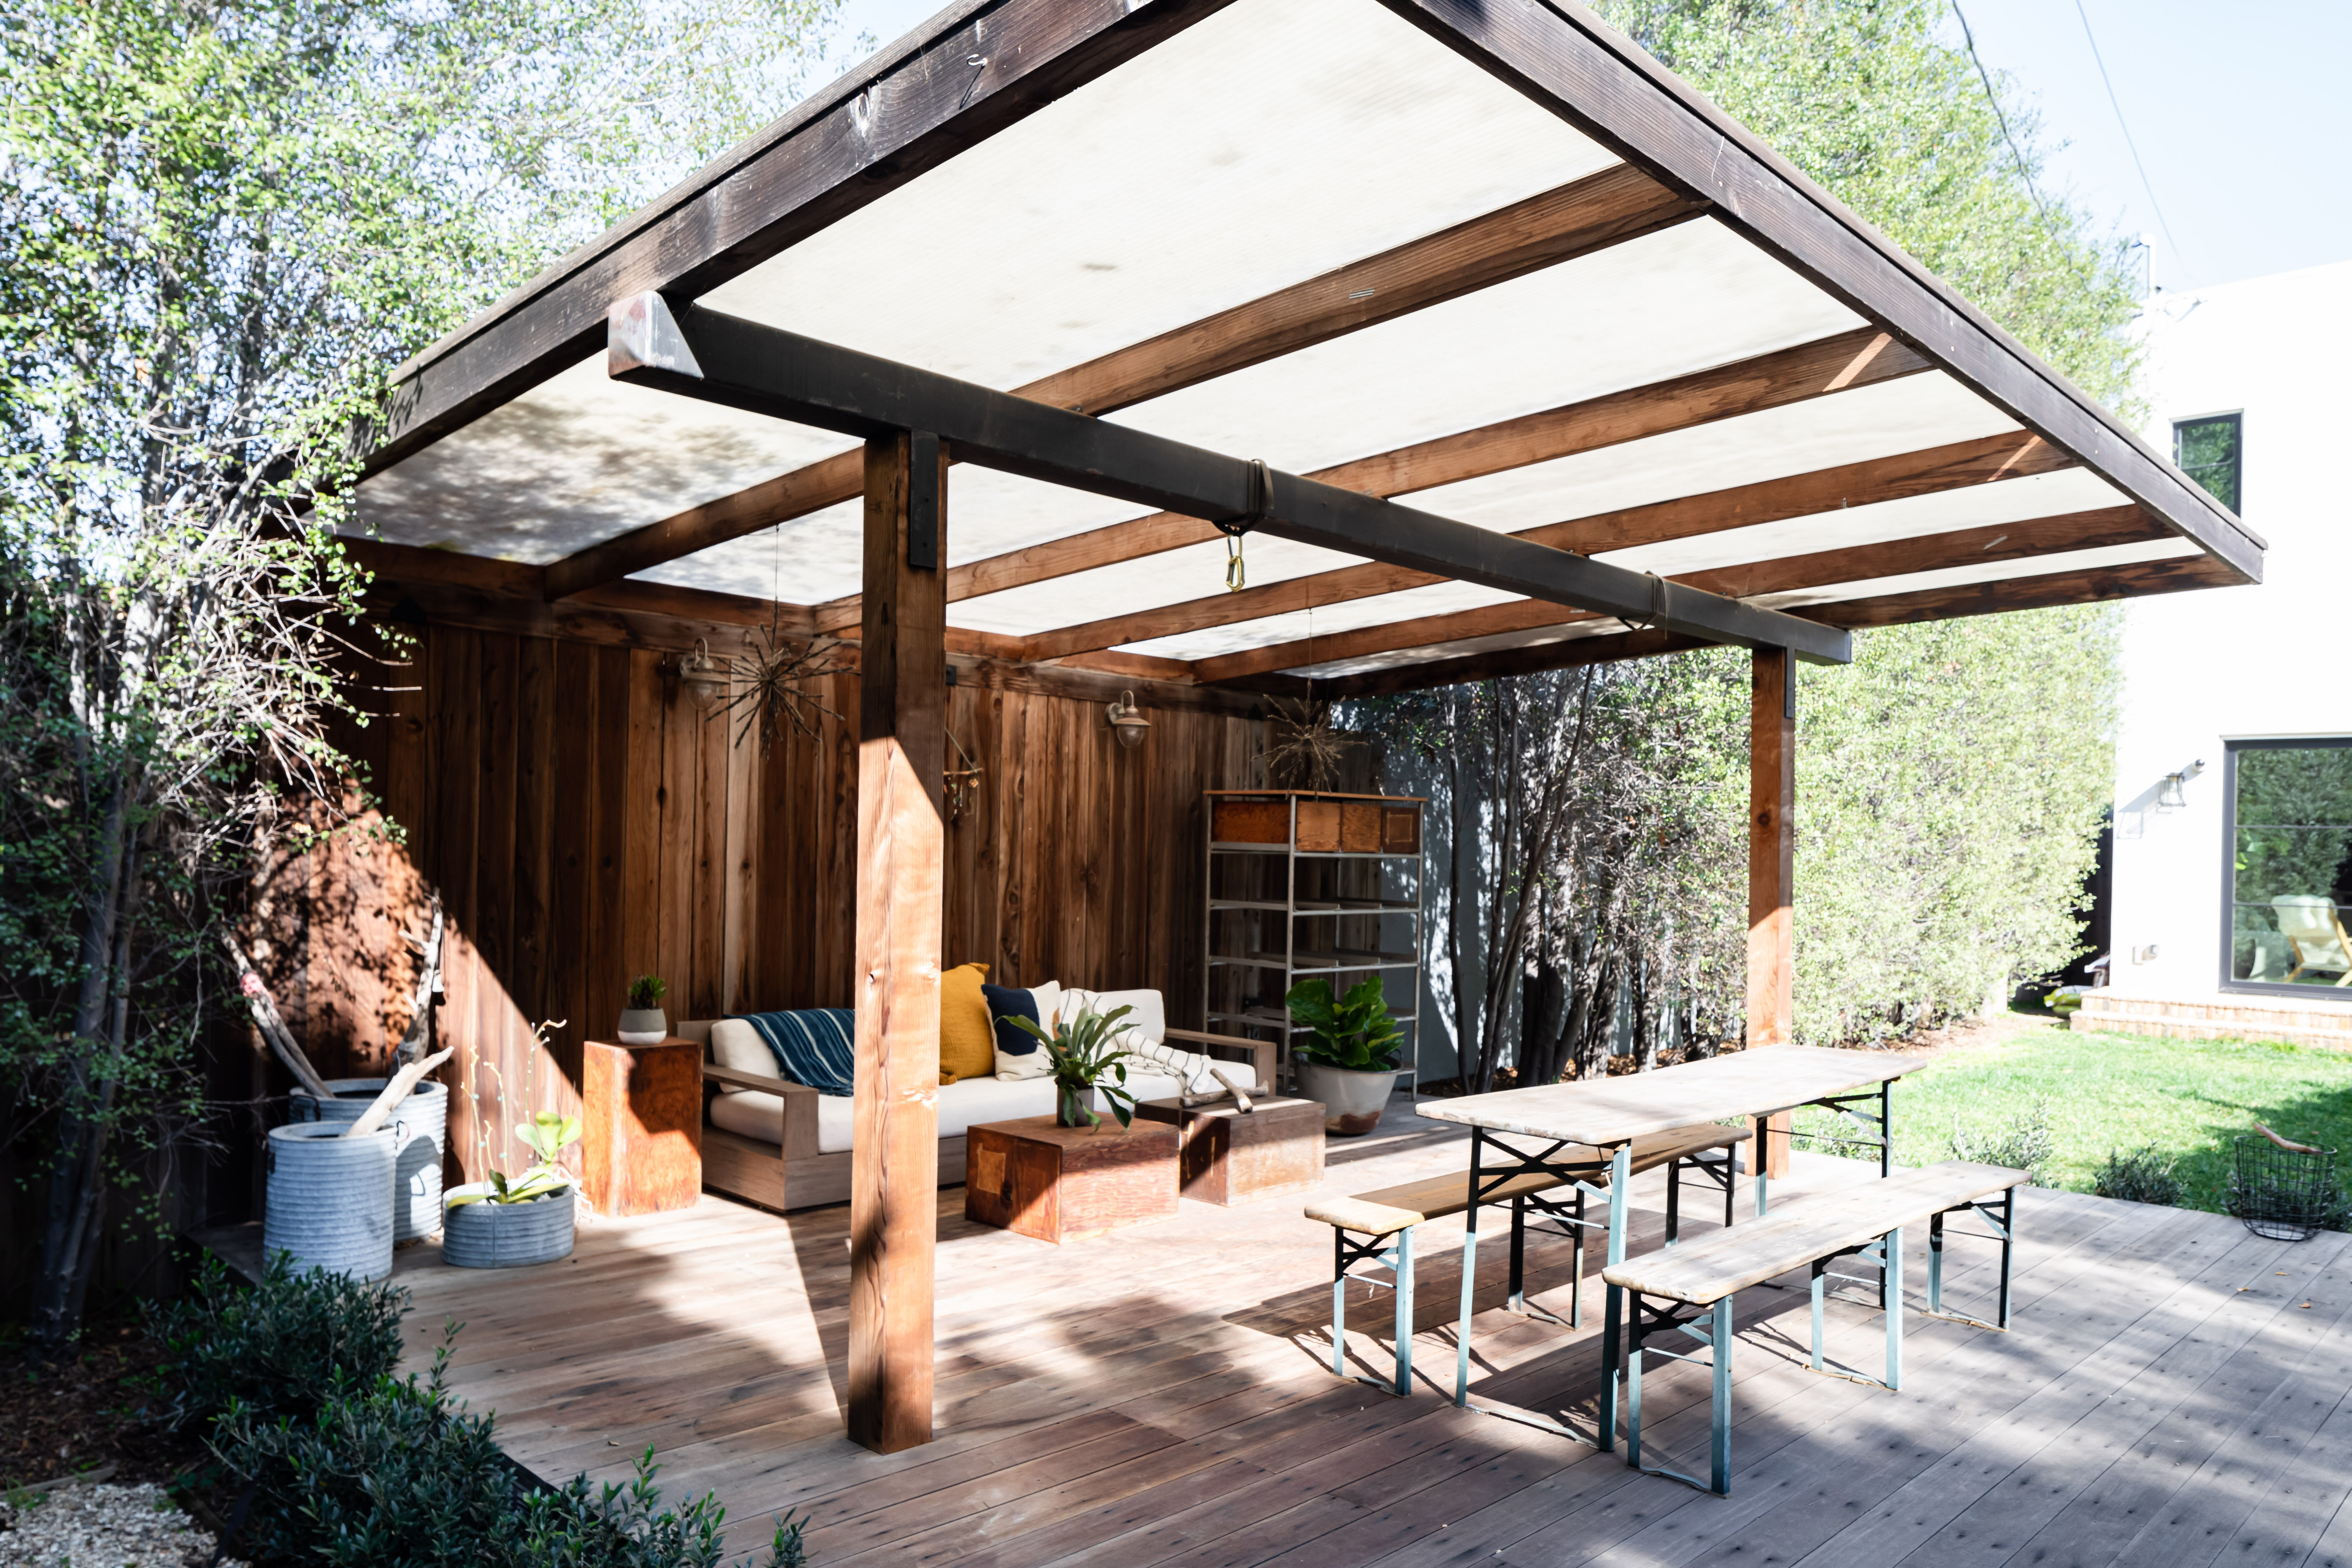 35 Creative Patio Cover Ideas for Any Budget